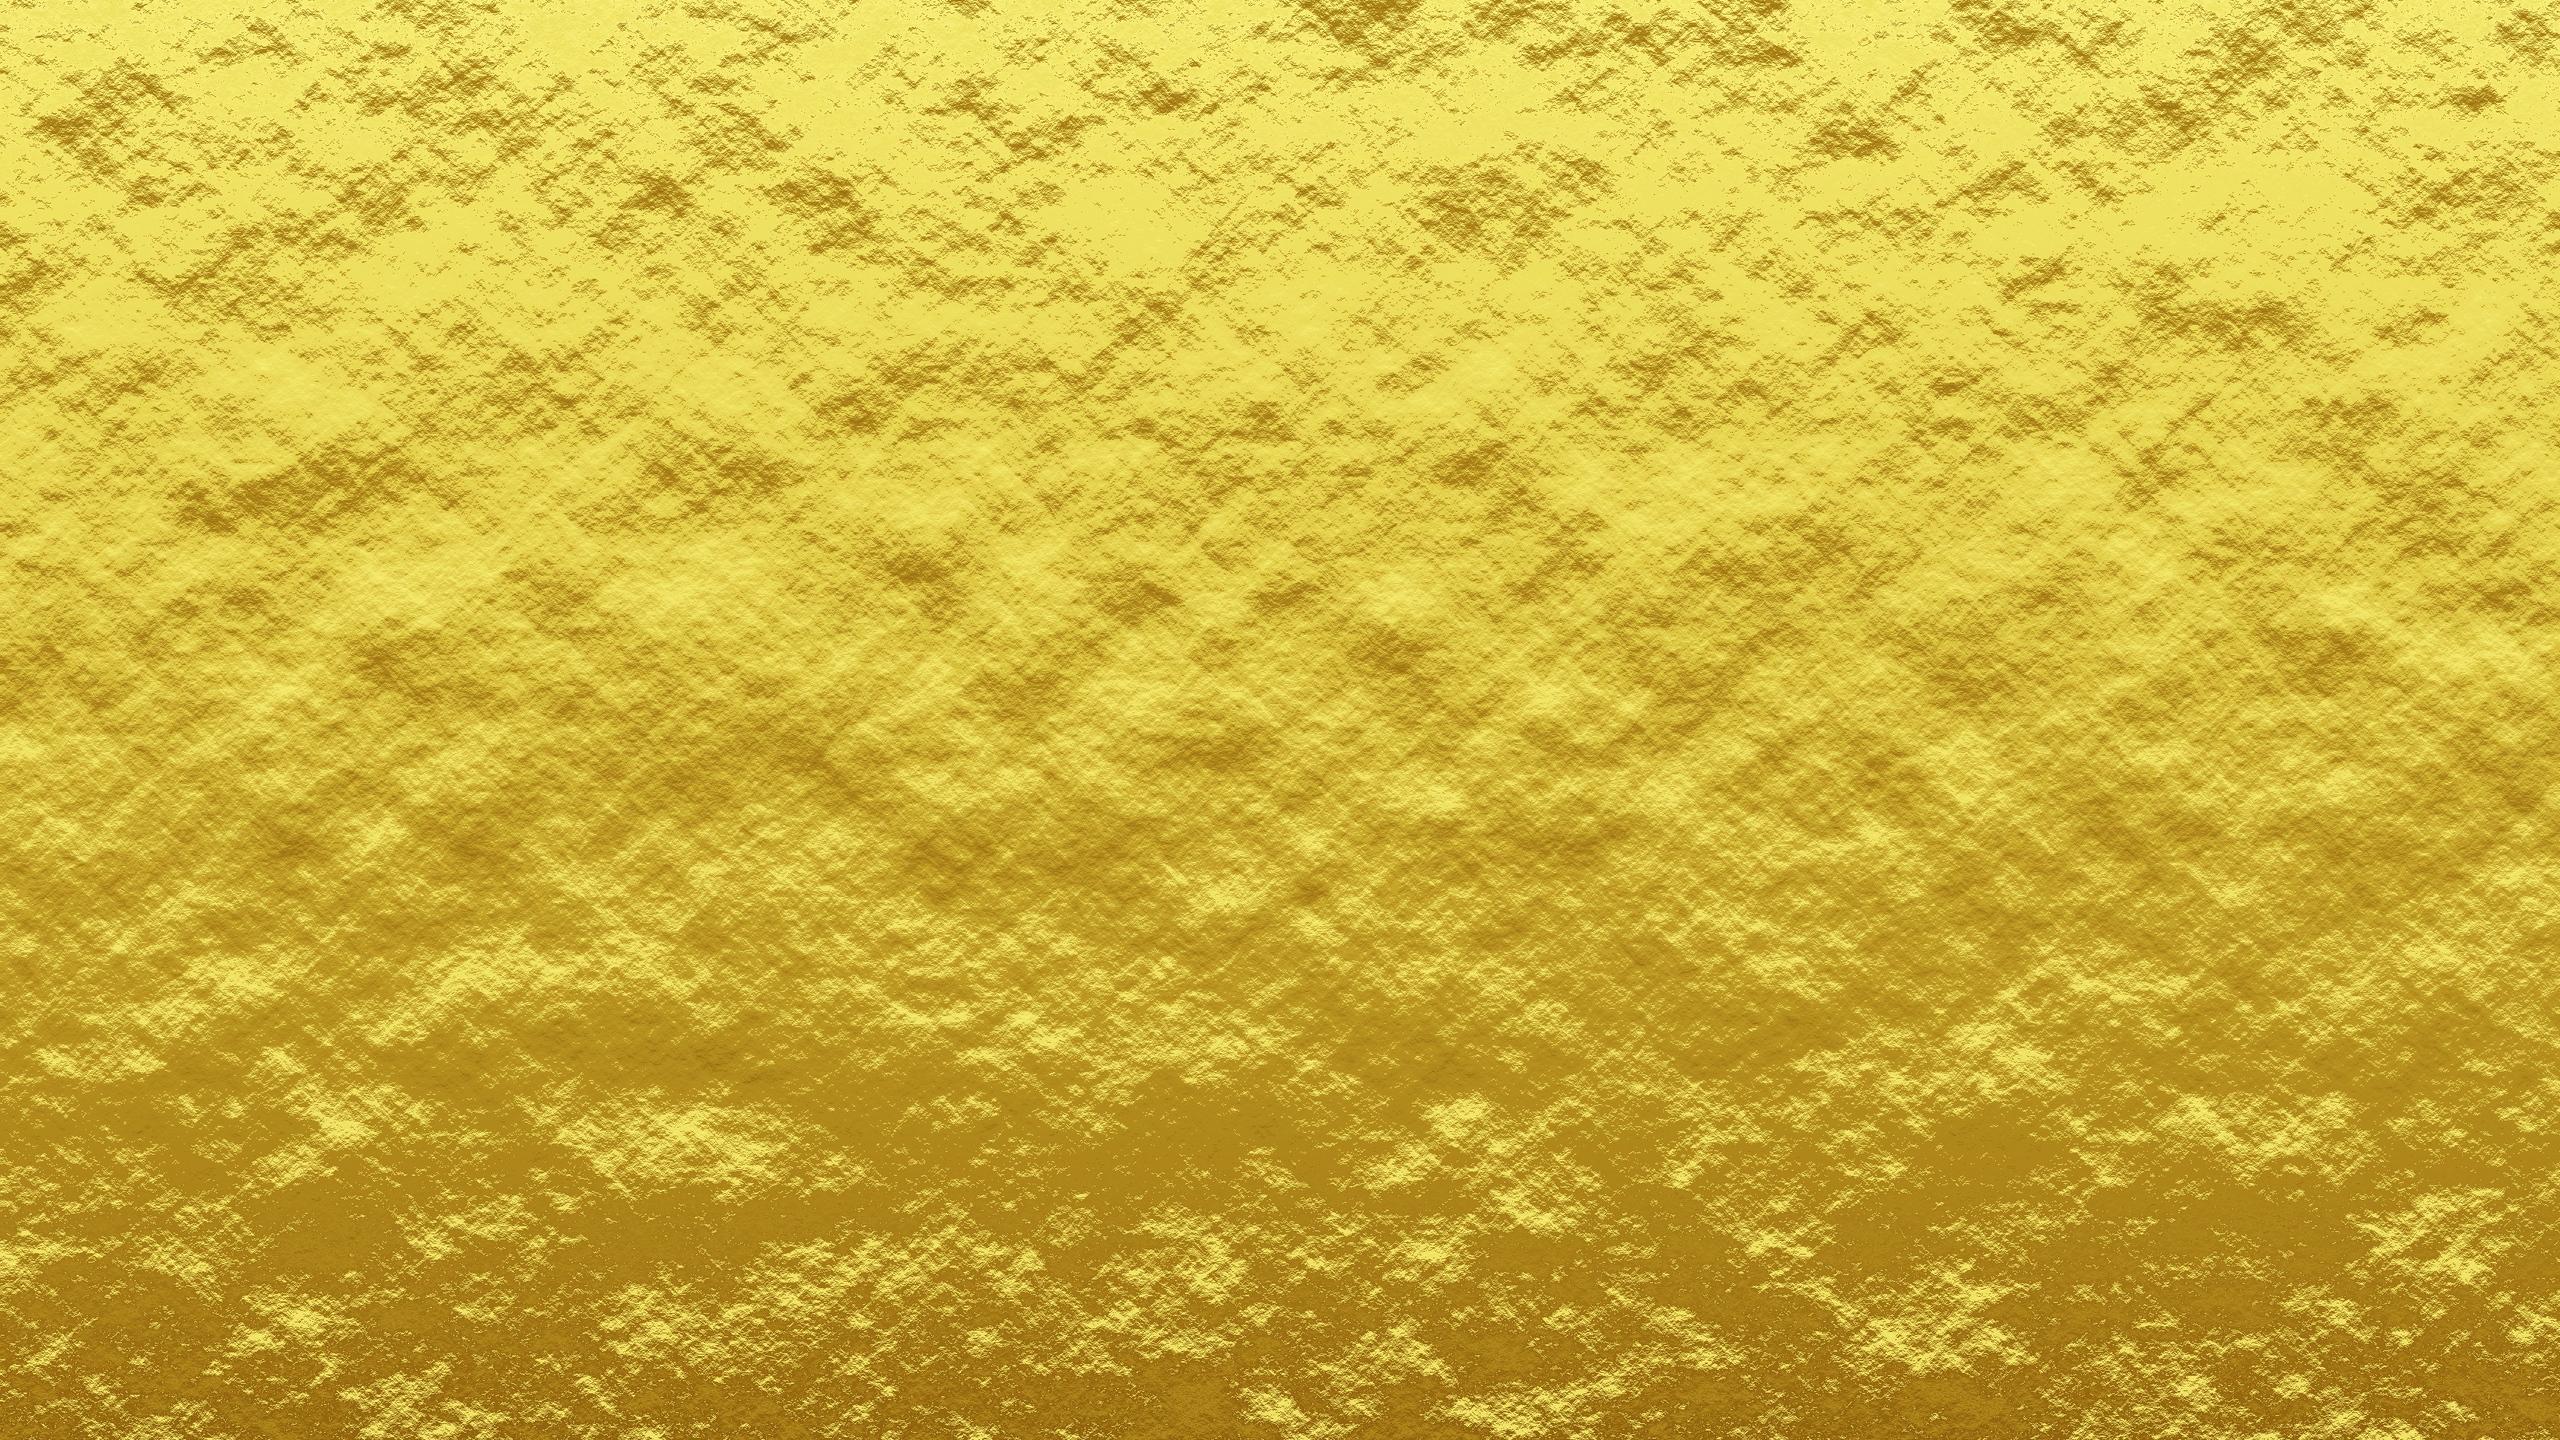 Download wallpaper 2560x1440 yellow, roughness, texture